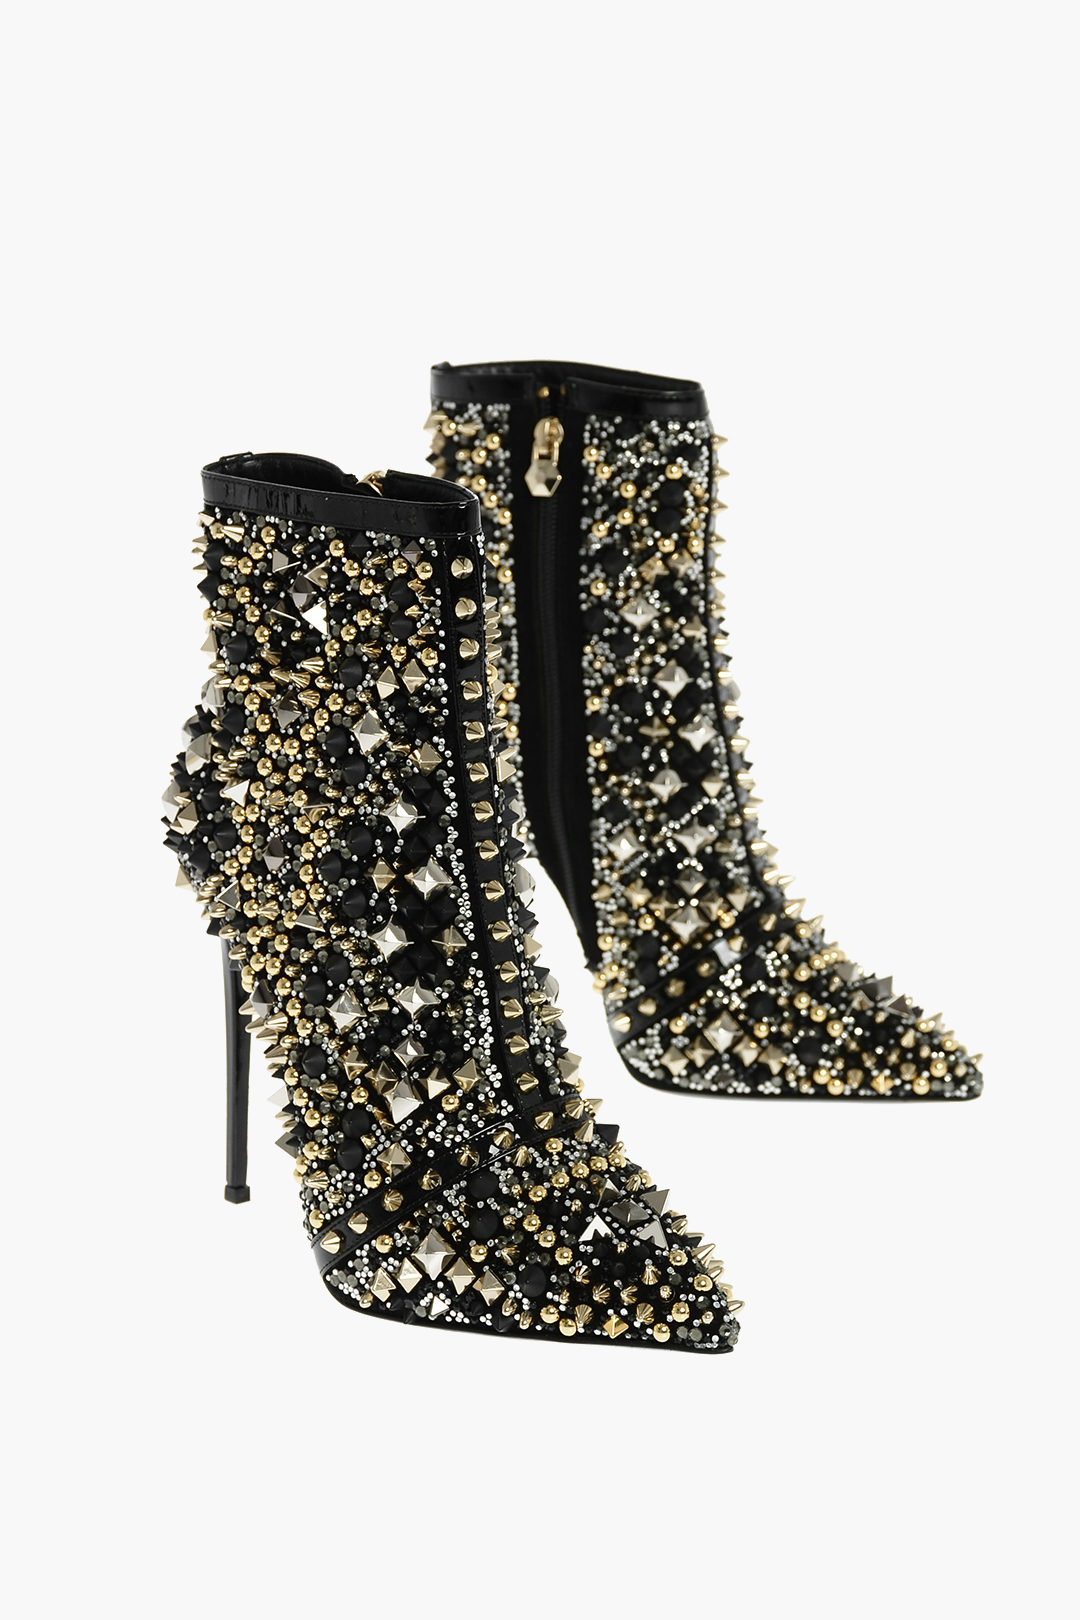 EVOLTAR Studded Star Block Heel Women's Boots- Premium Synthetic Leather  Footwear with Fashionable Buckle Embellishment